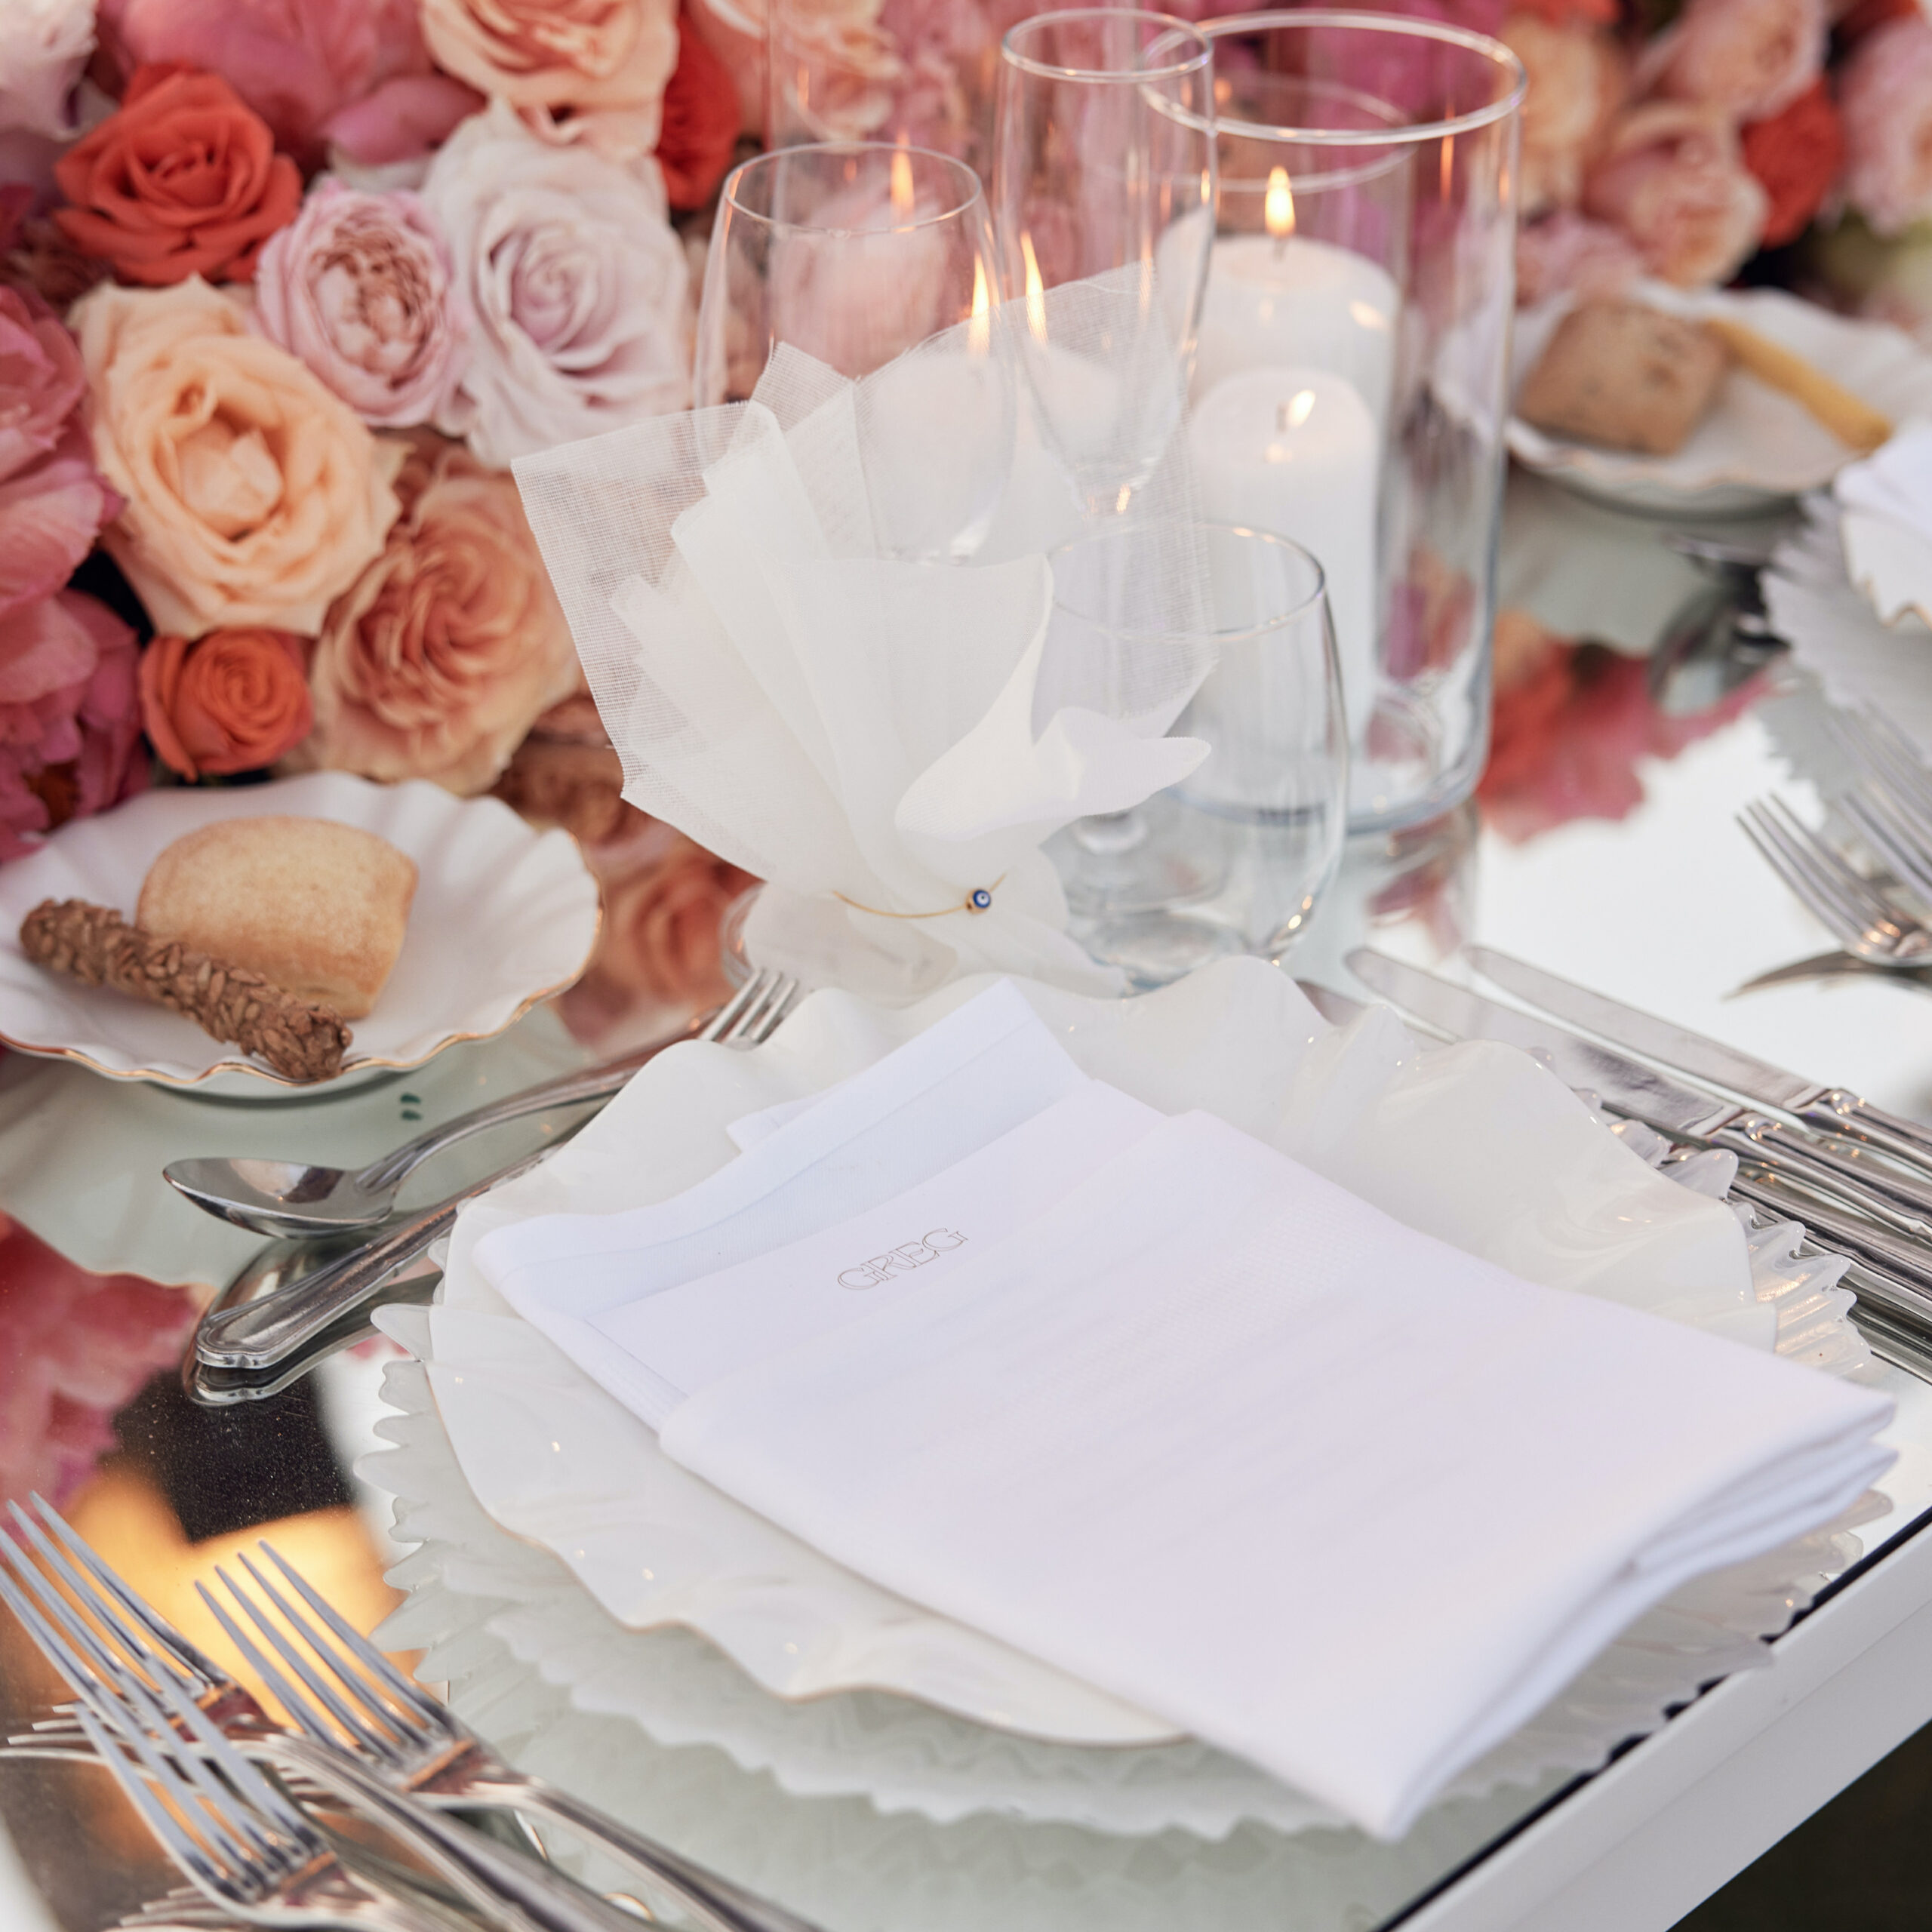 symphony-of-romance-wedding-reception-shades-of-pink-and-peach-linen-favors-with-evil-eye-main-photo